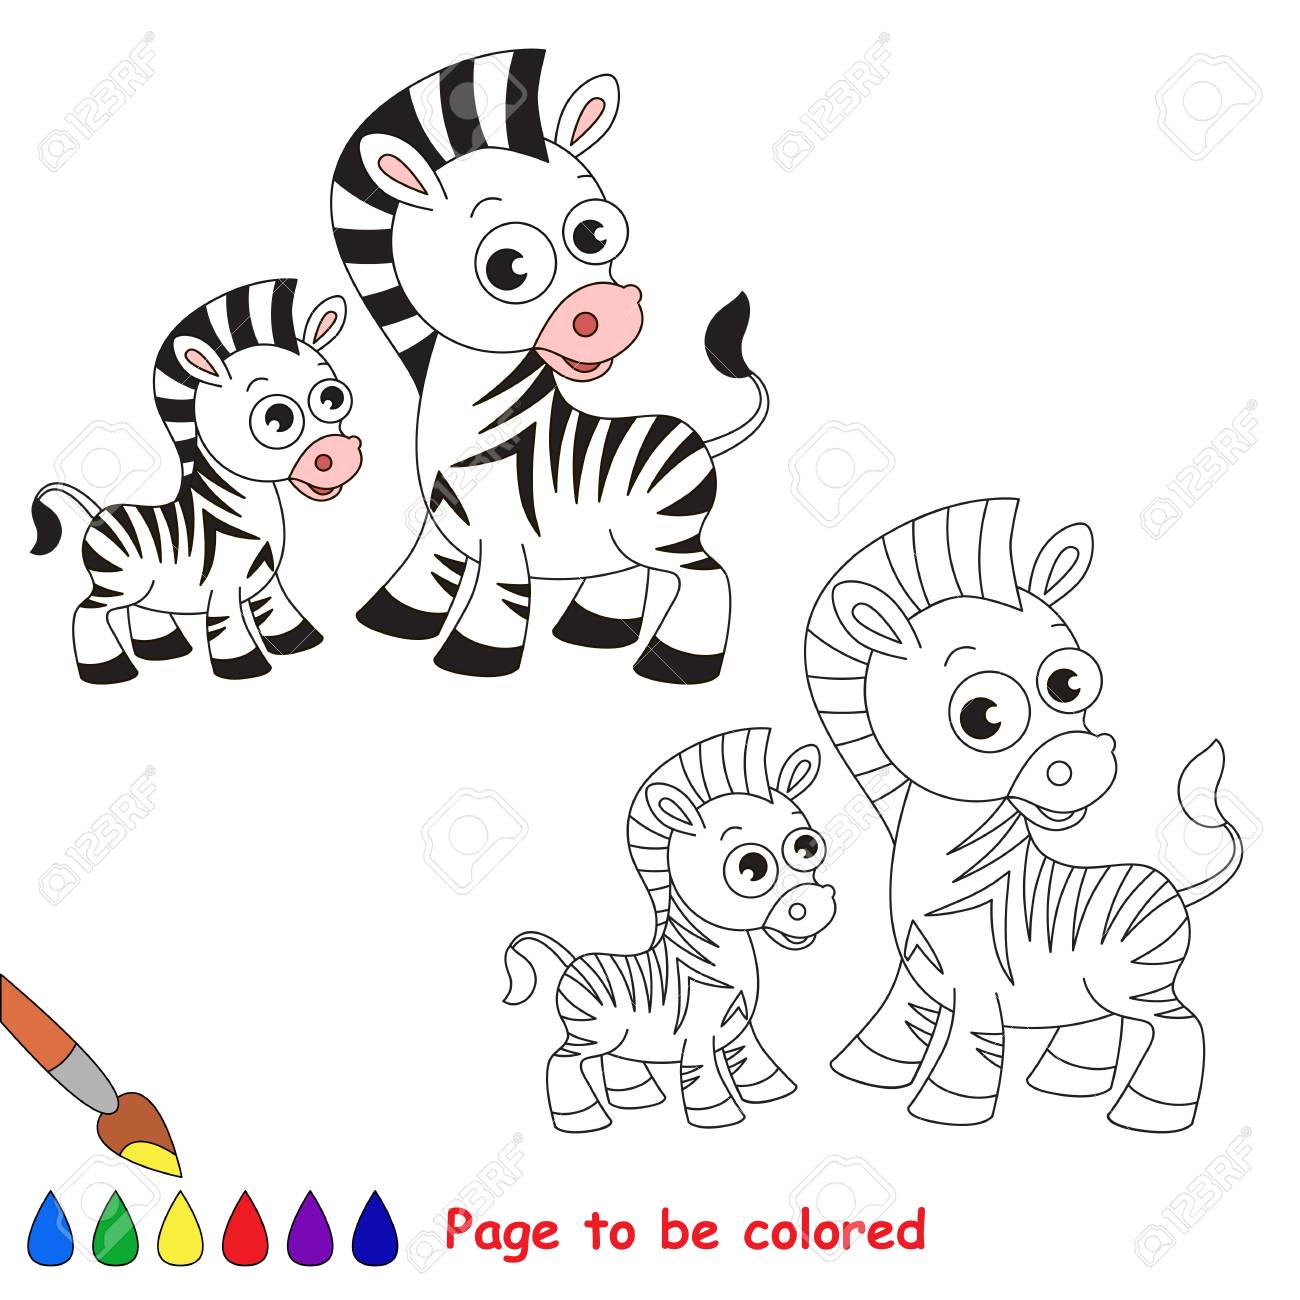 Zebra and her baby to be colored coloring book to educate kids learn colors visual educational game easy kid gaming and primary education simple level of difficulty coloring pages royalty free svg